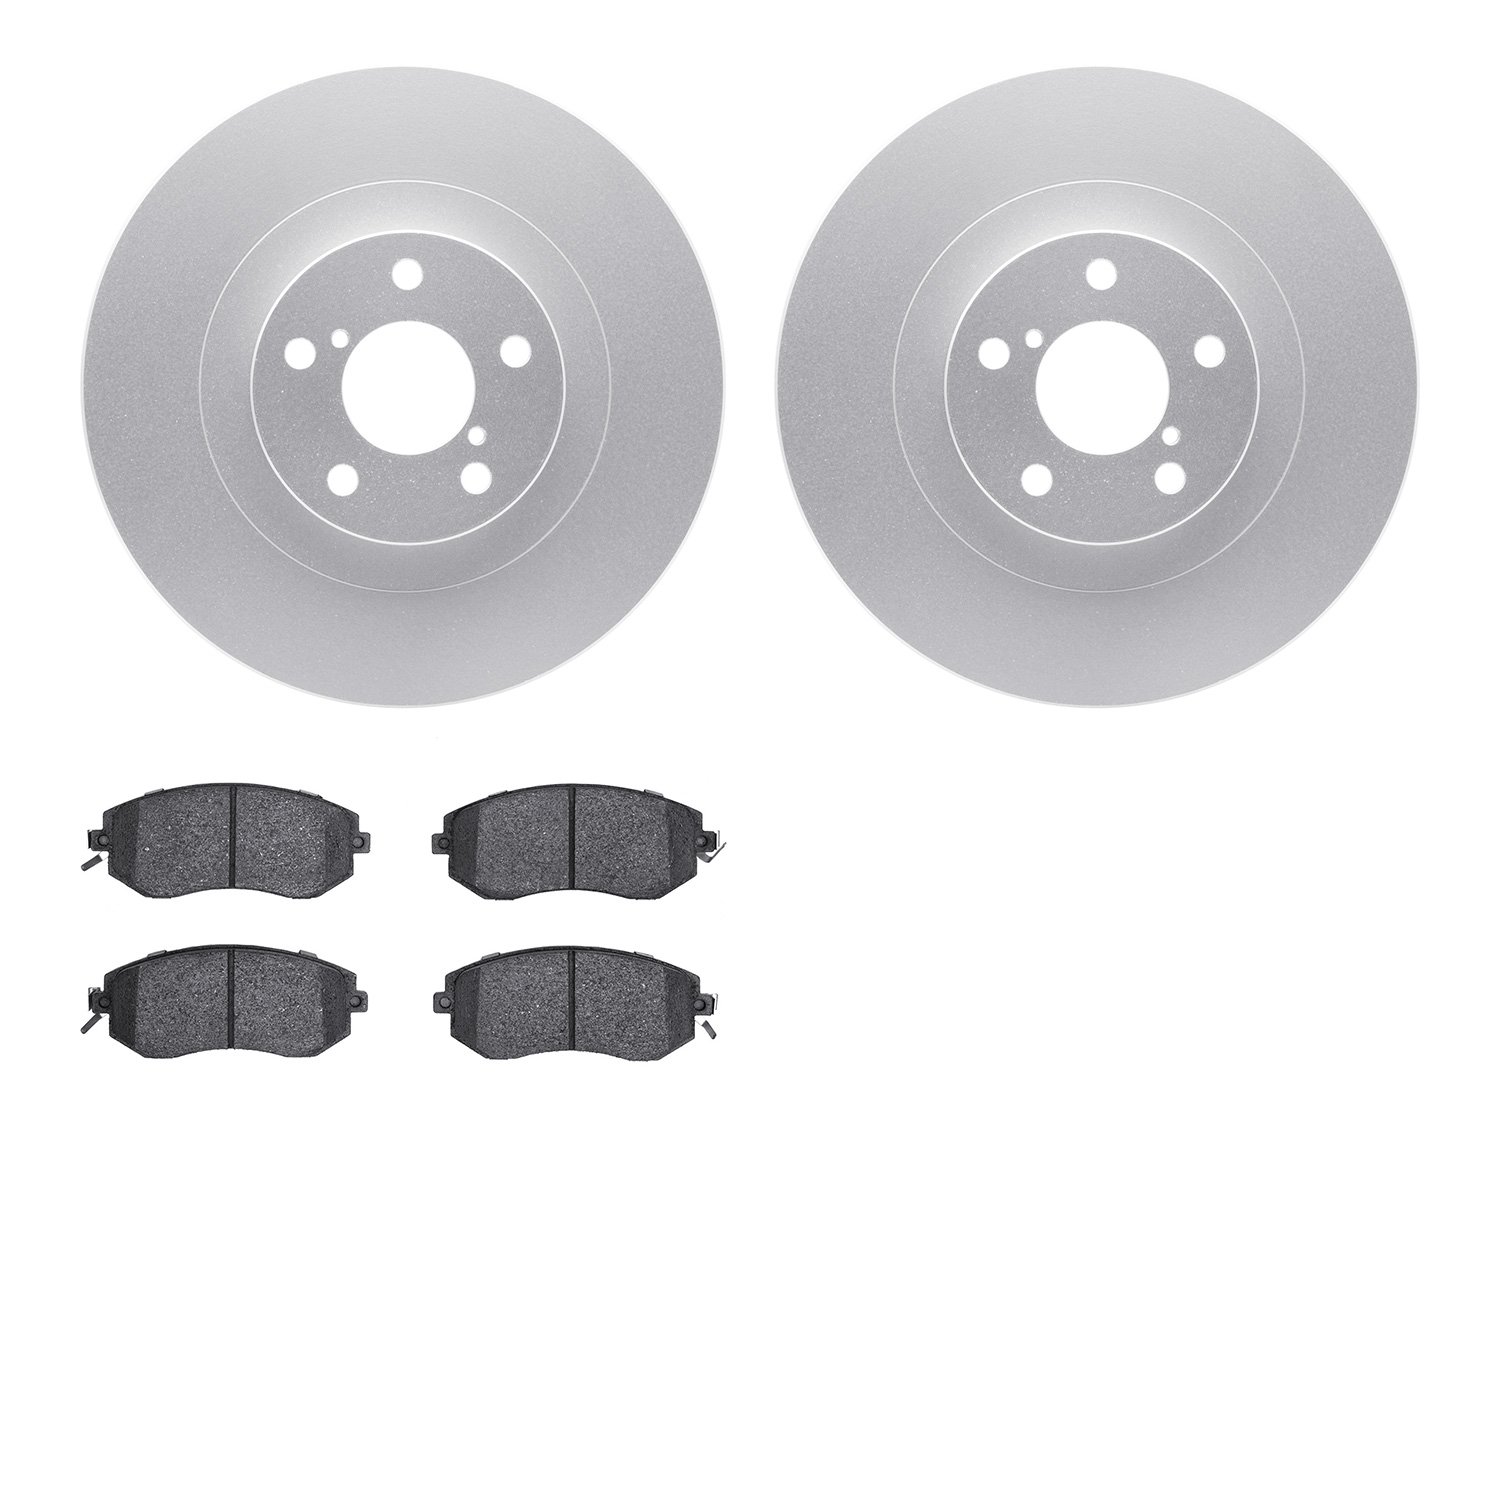 4302-13036 Geospec Brake Rotors with 3000-Series Ceramic Brake Pads Kit, Fits Select Multiple Makes/Models, Position: Front